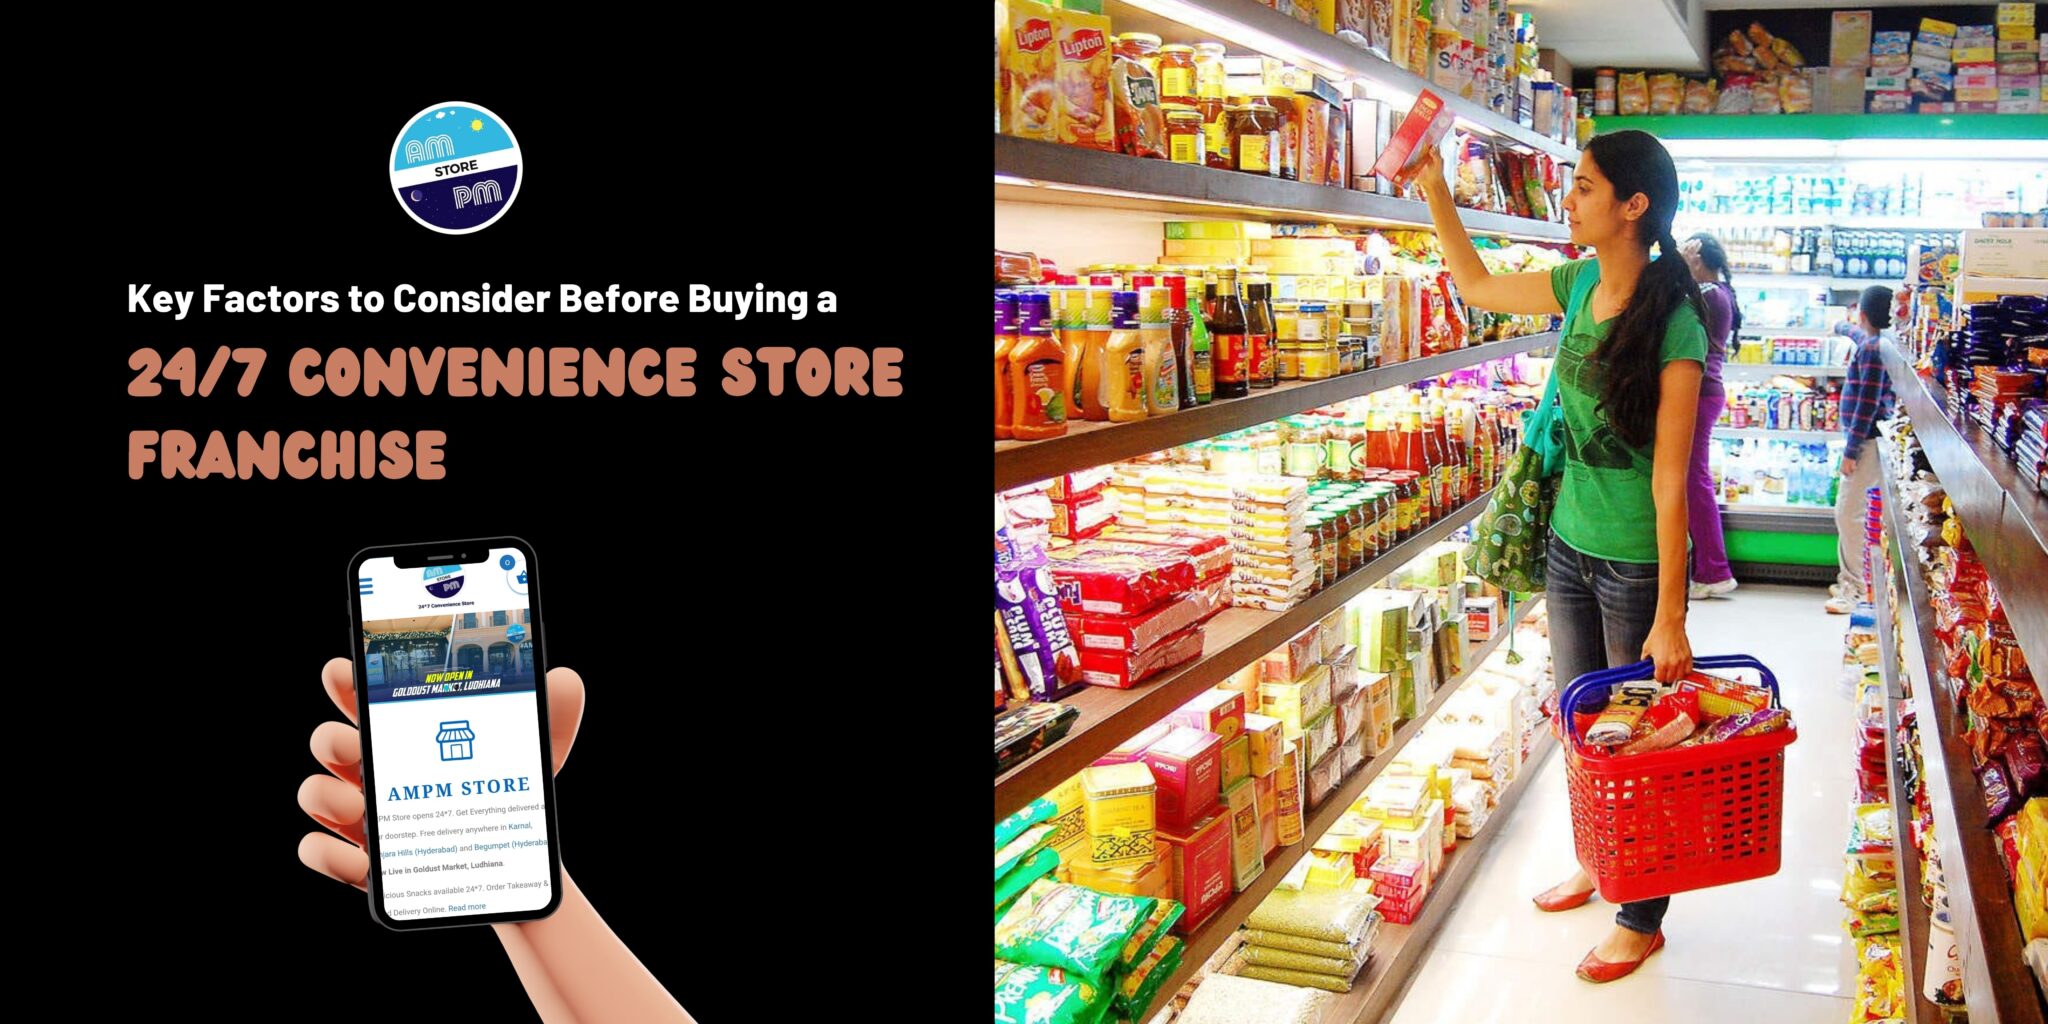 Key Factors to Consider Before Buying a 24/7 Convenience Store Franchise